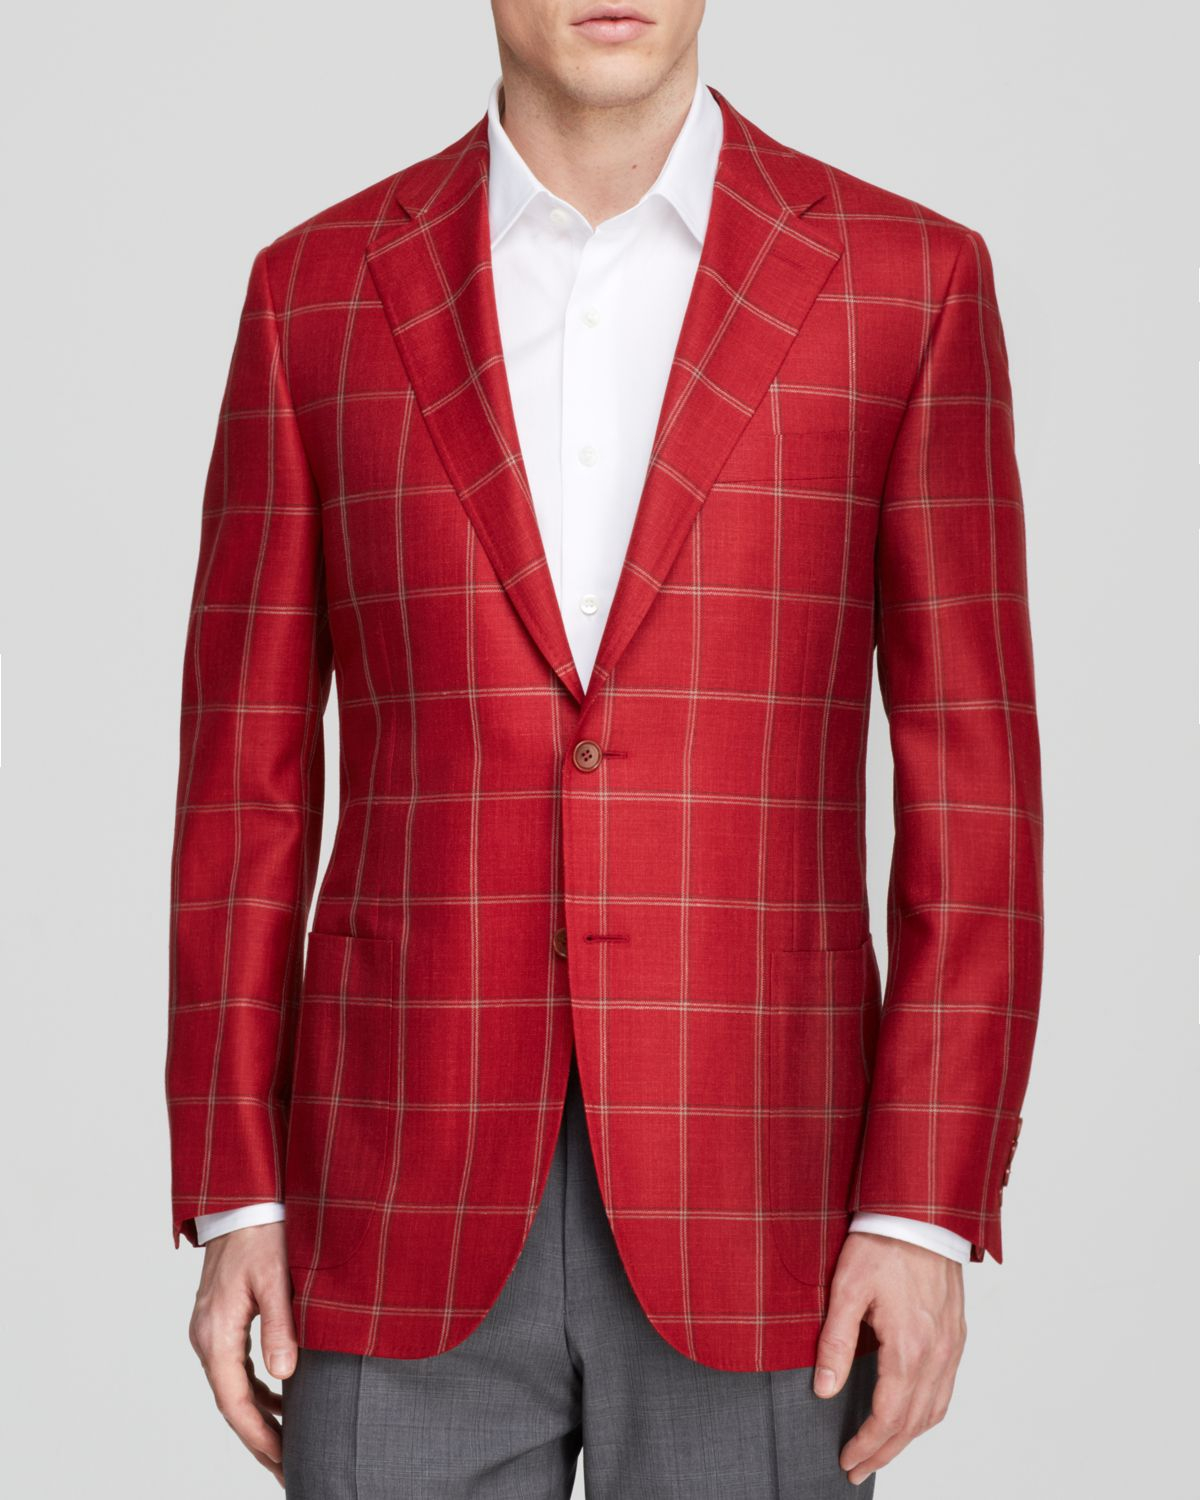 Canali Windowpane Plaid Sport Coat - Classic Fit in Red for Men | Lyst